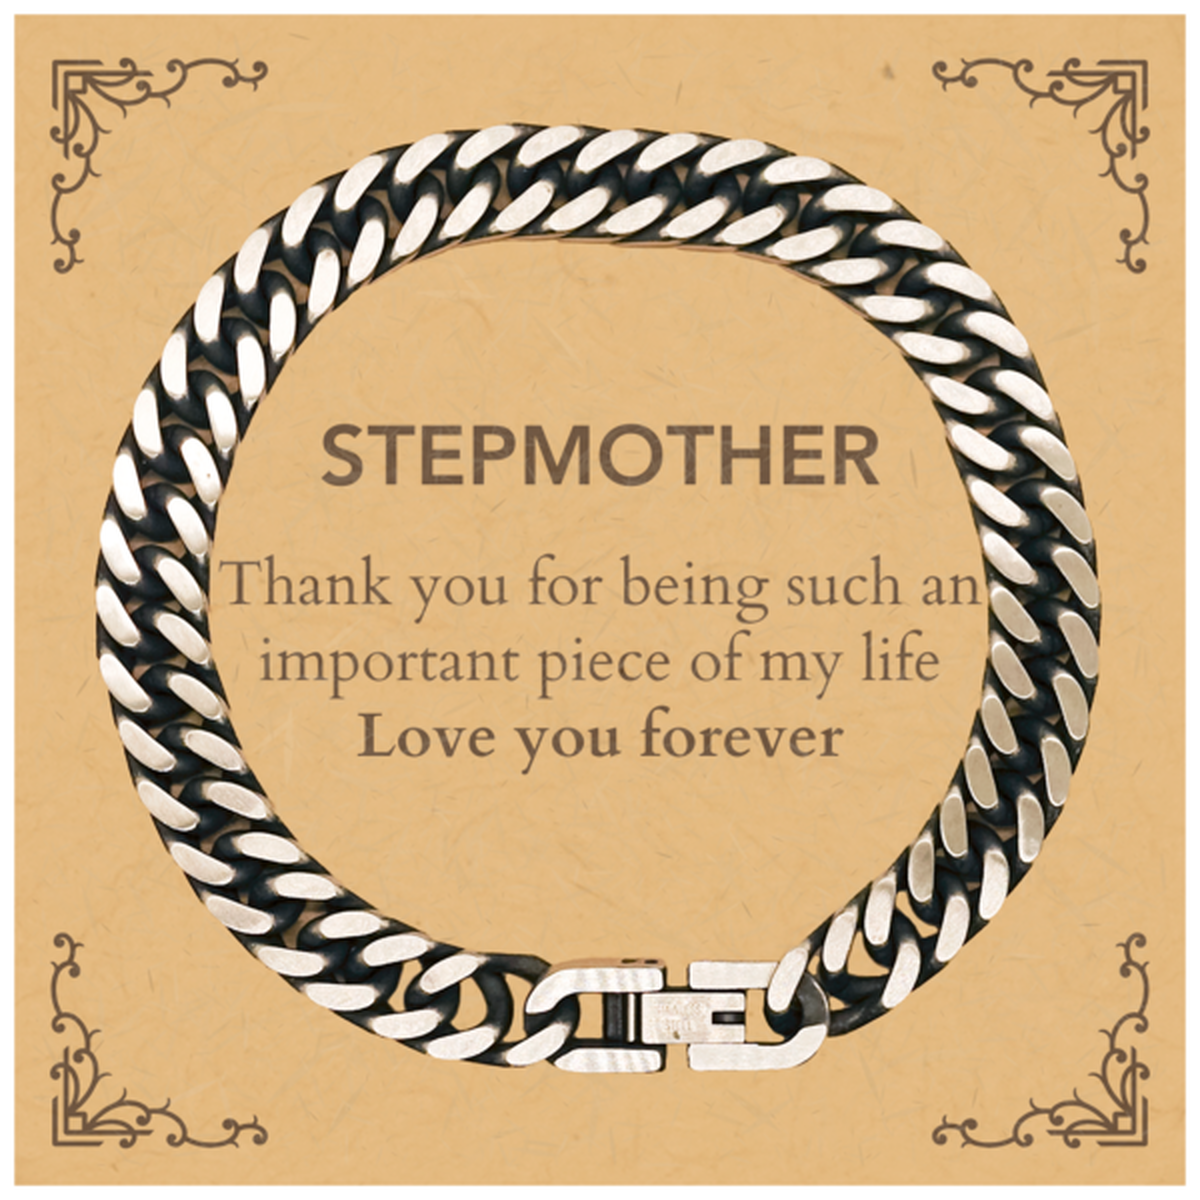 Appropriate Stepmother Cuban Link Chain Bracelet Epic Birthday Gifts for Stepmother Thank you for being such an important piece of my life Stepmother Christmas Mothers Fathers Day